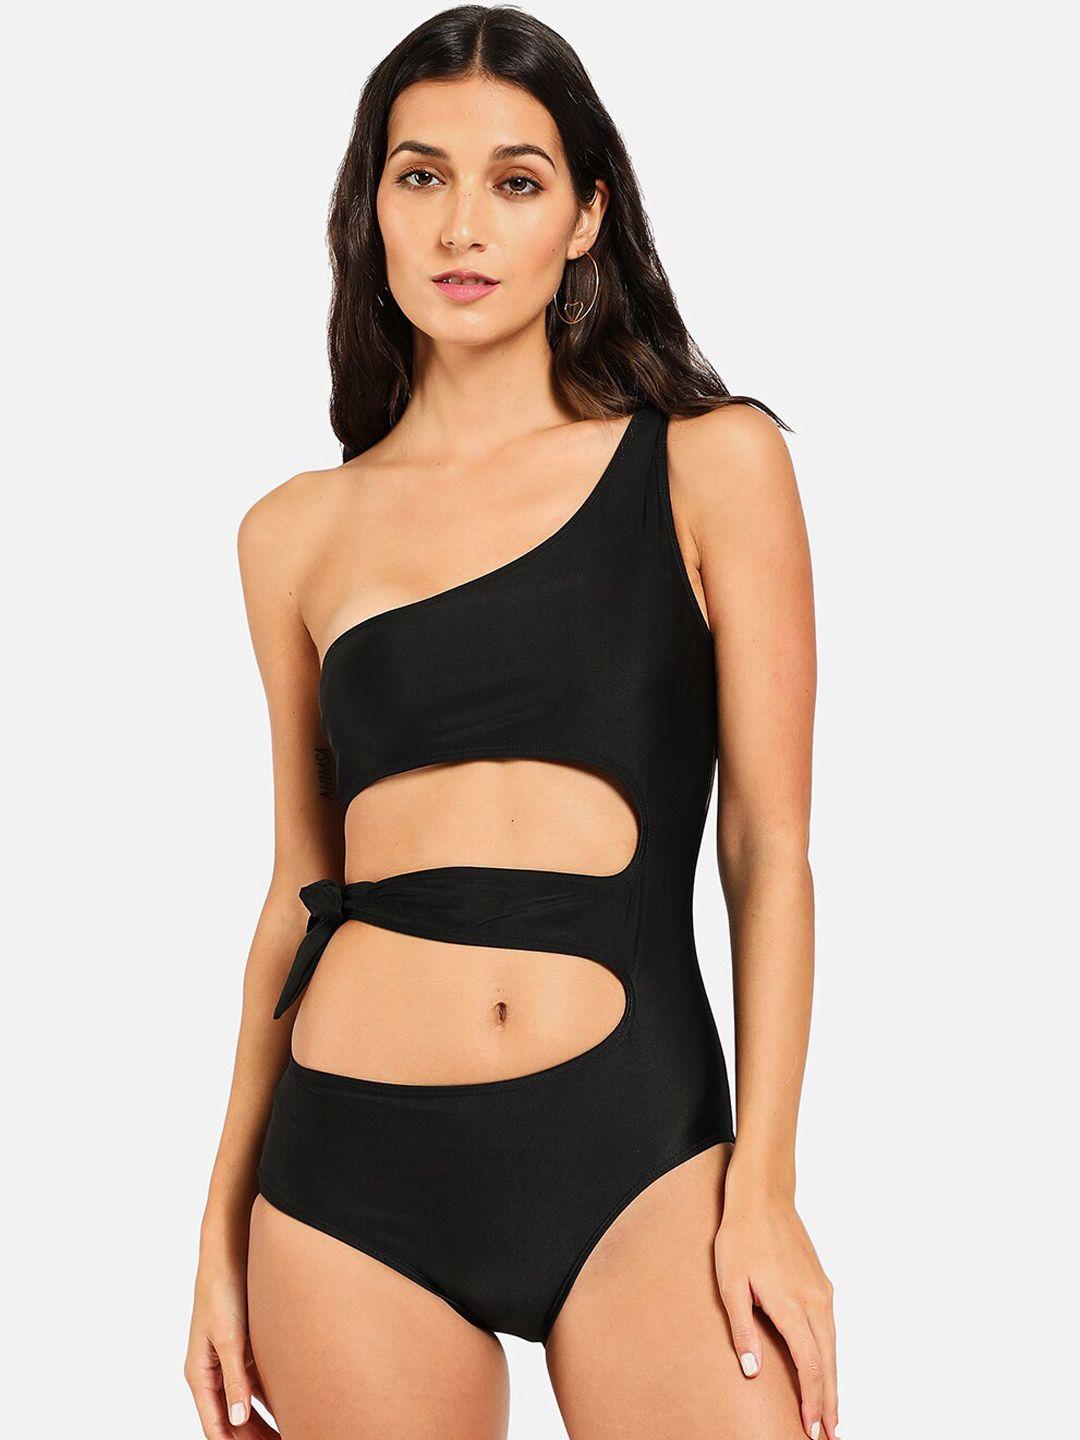 haute sauce by campus sutra women cut-out  one-piece swimwear